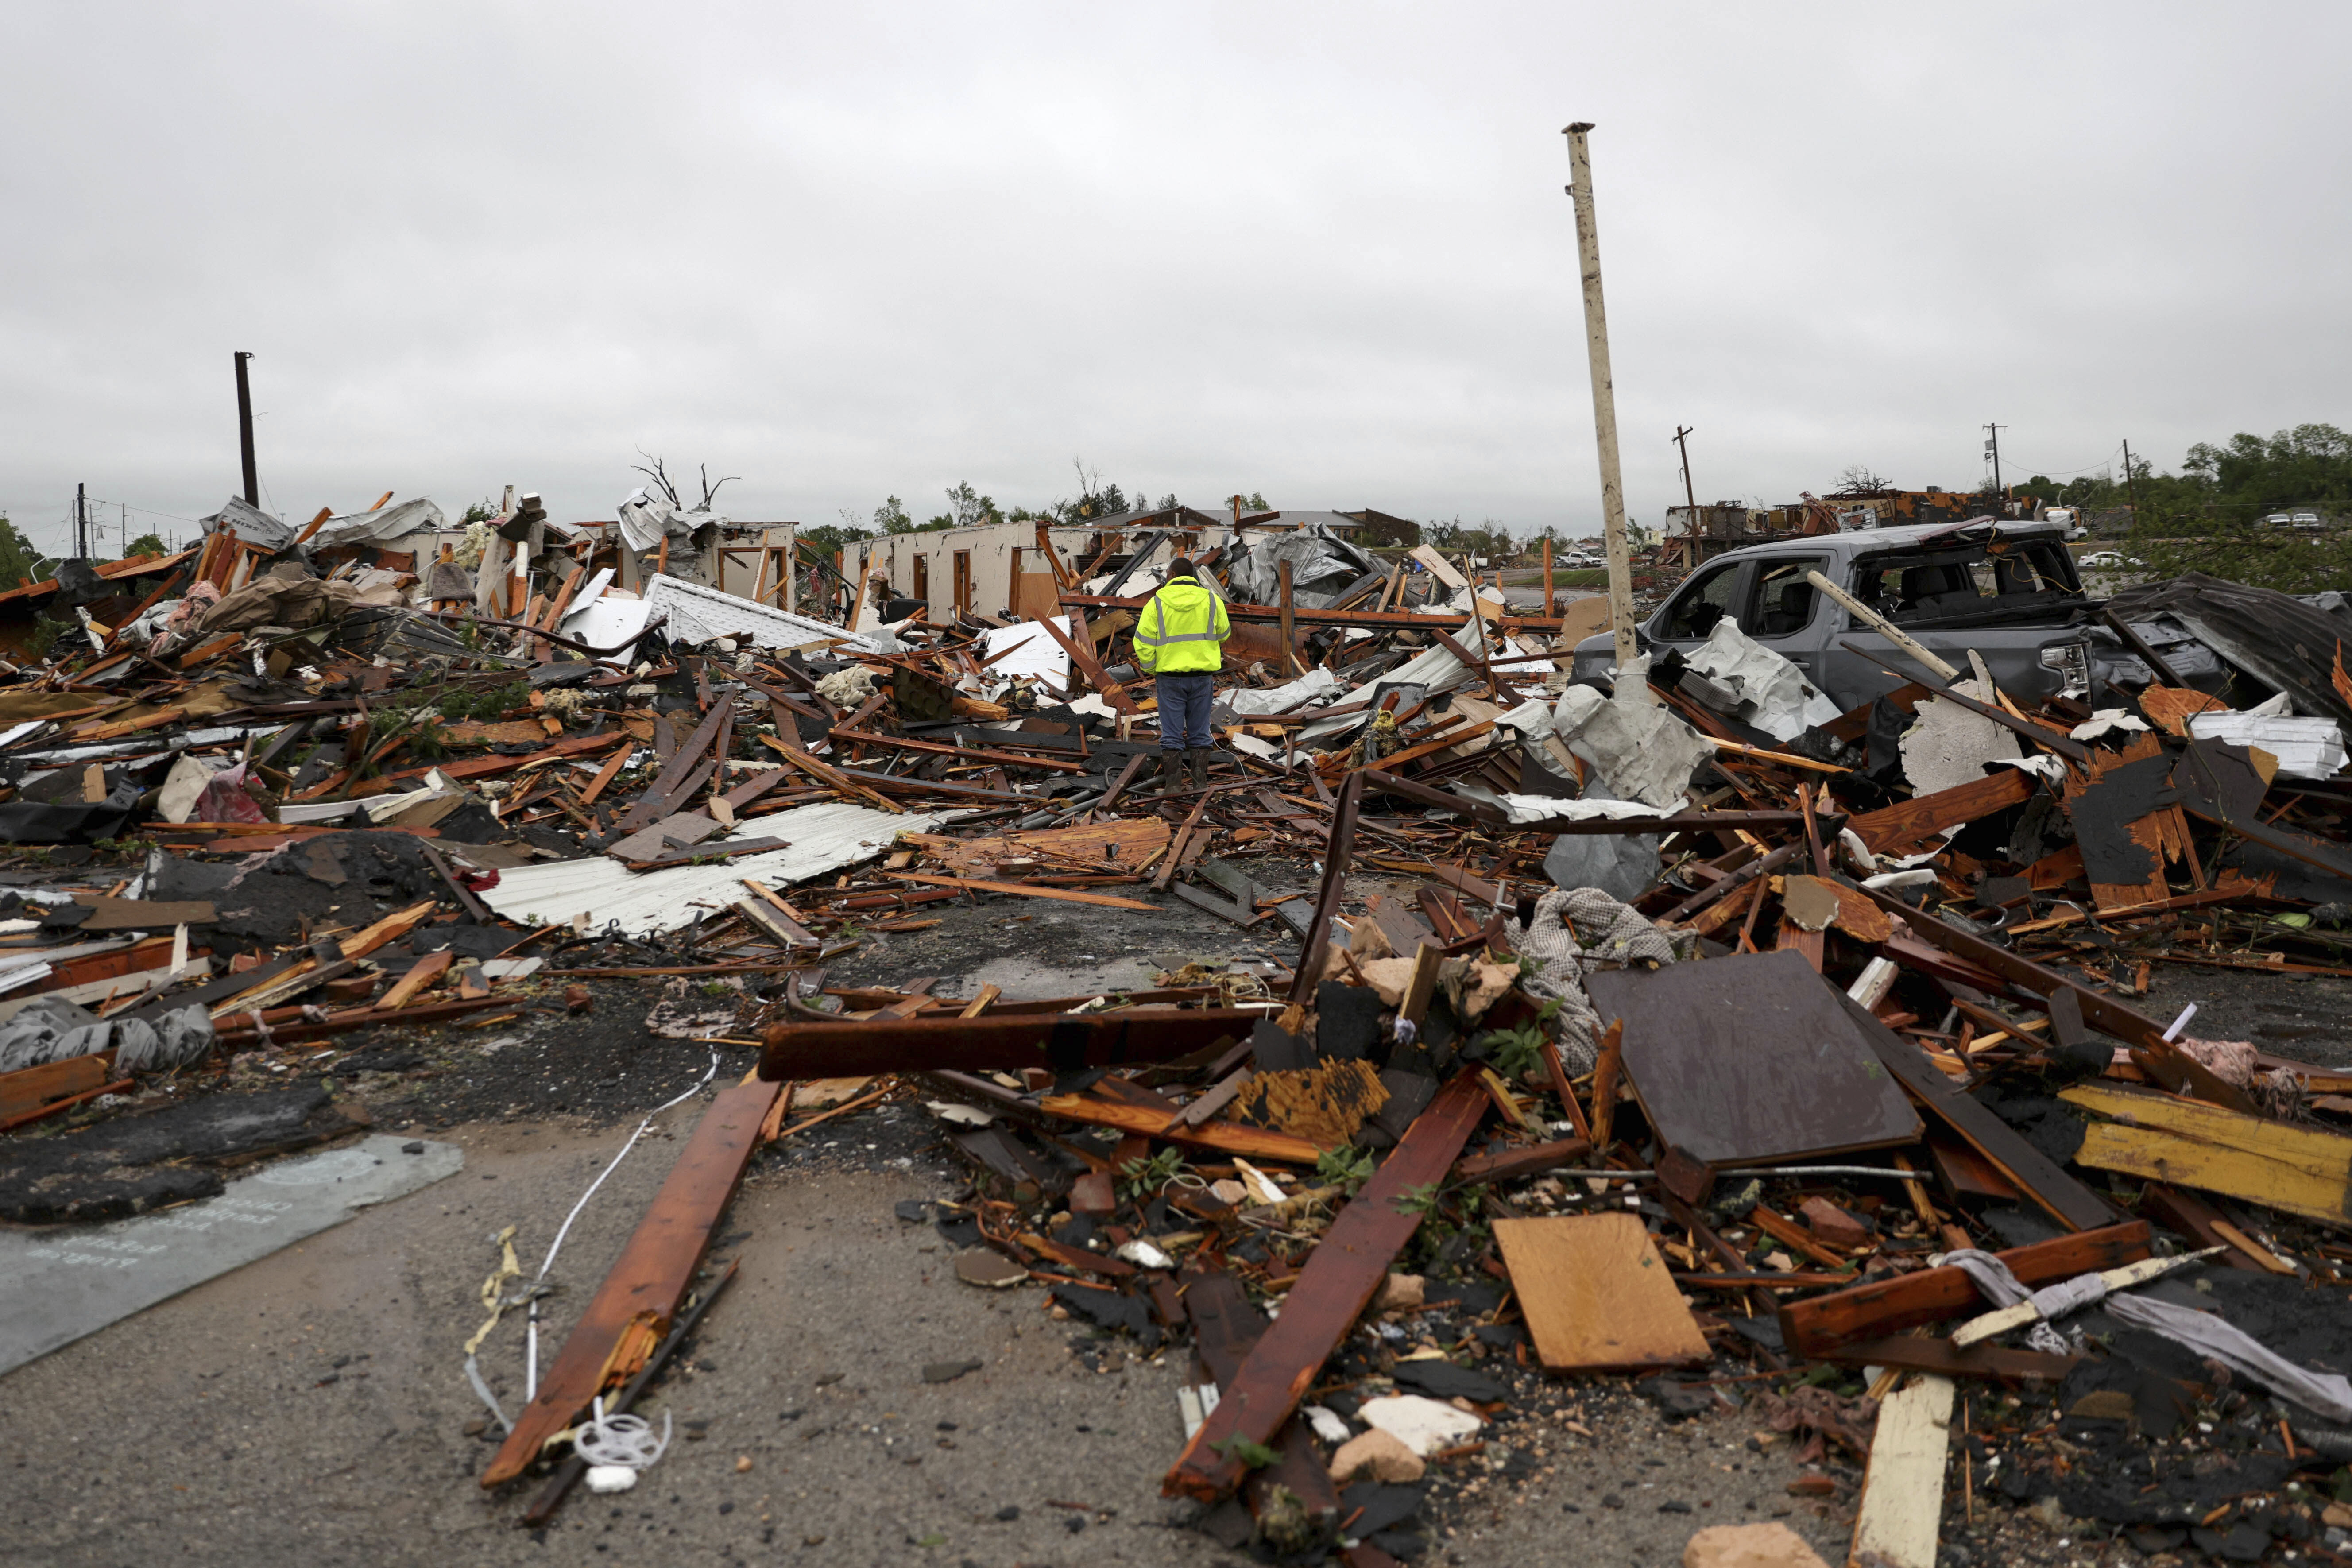 Tornadoes kills at least 2 including 1 child in Oklahoma